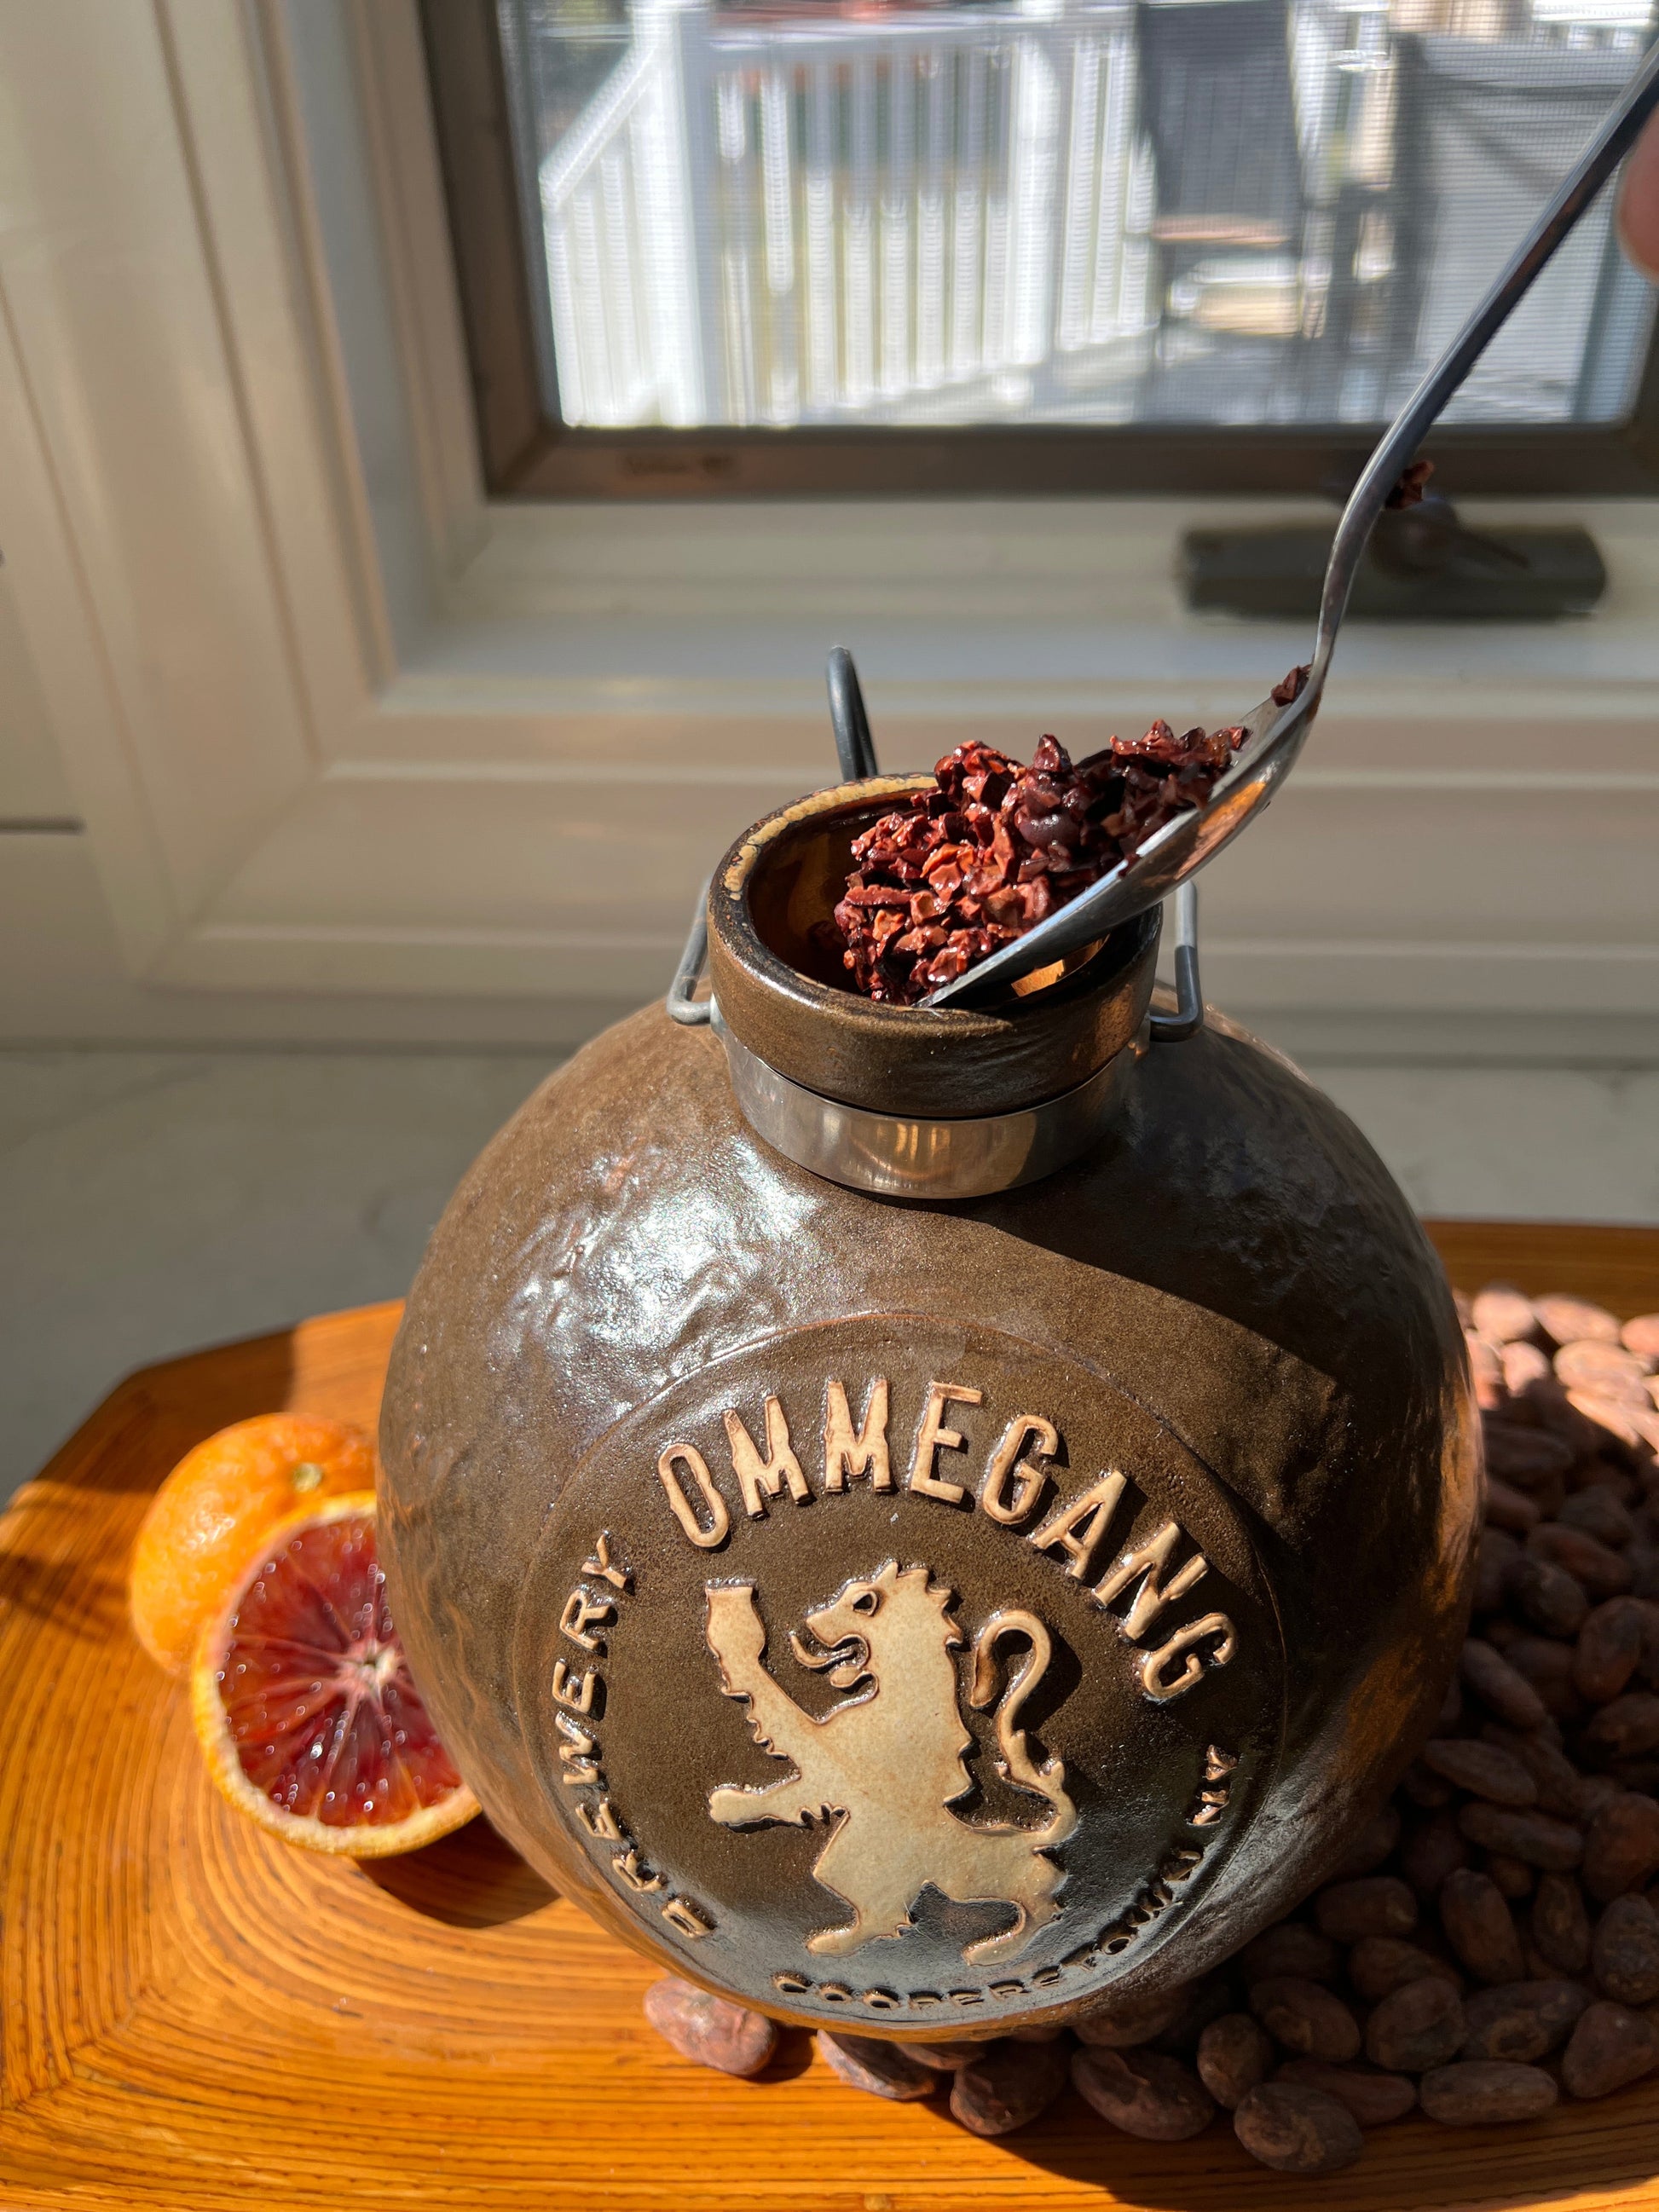 negroni nibs go into a growler for soaking